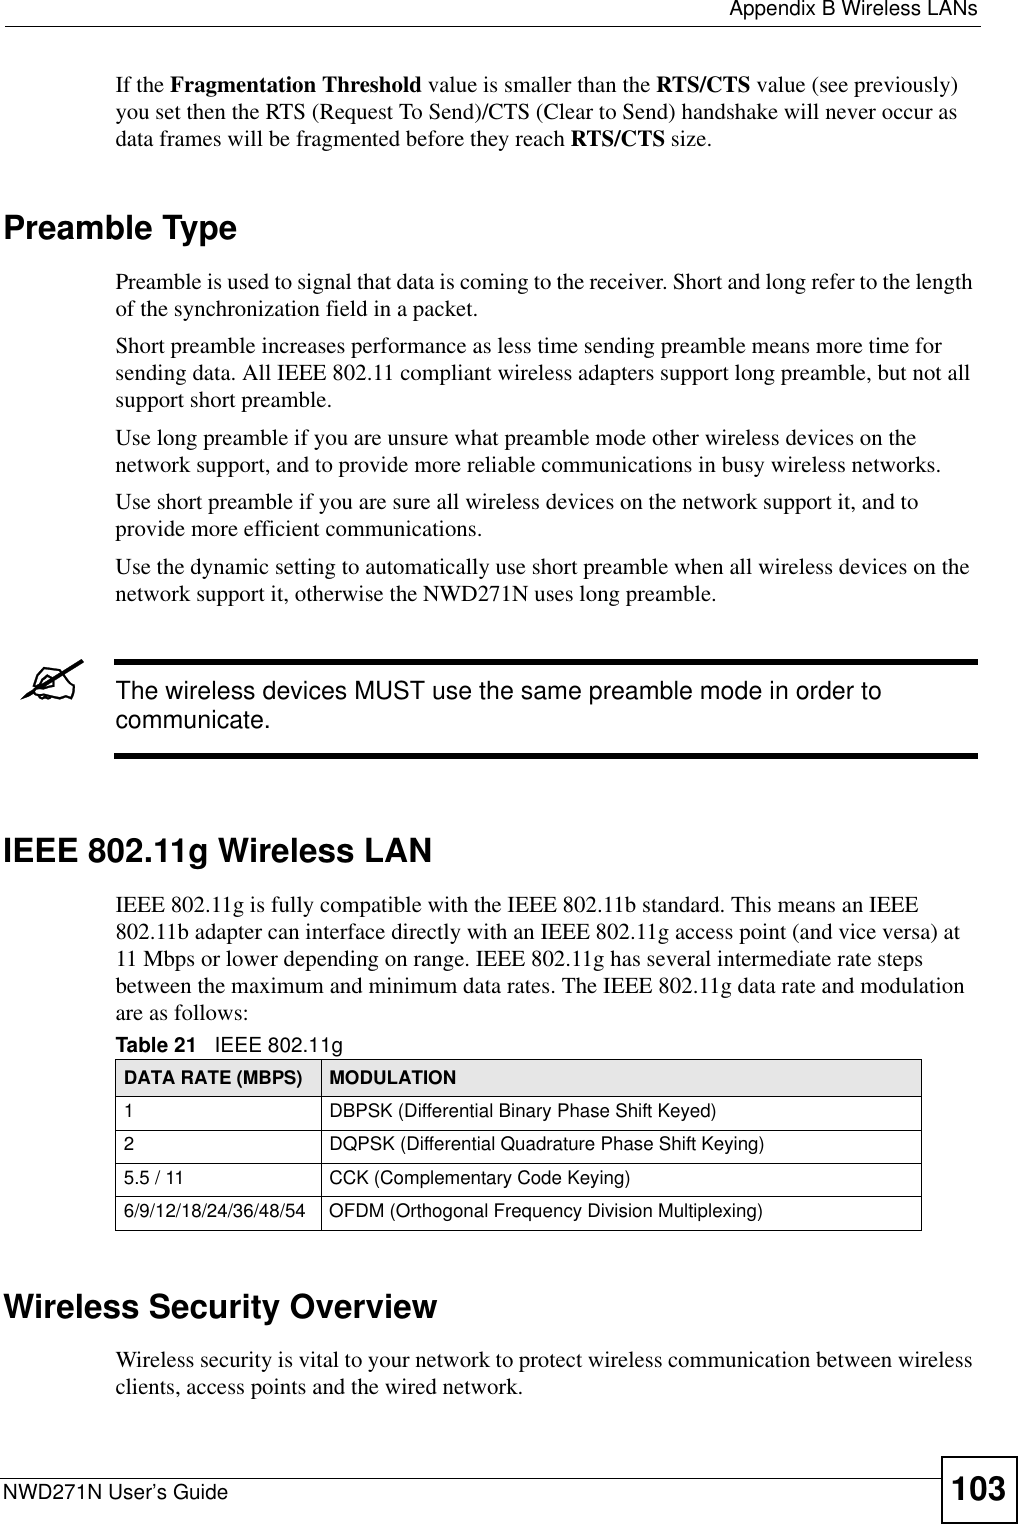  Appendix B Wireless LANsNWD271N User’s Guide 103If the Fragmentation Threshold value is smaller than the RTS/CTS value (see previously) you set then the RTS (Request To Send)/CTS (Clear to Send) handshake will never occur as data frames will be fragmented before they reach RTS/CTS size.Preamble TypePreamble is used to signal that data is coming to the receiver. Short and long refer to the length of the synchronization field in a packet.Short preamble increases performance as less time sending preamble means more time for sending data. All IEEE 802.11 compliant wireless adapters support long preamble, but not all support short preamble. Use long preamble if you are unsure what preamble mode other wireless devices on the network support, and to provide more reliable communications in busy wireless networks. Use short preamble if you are sure all wireless devices on the network support it, and to provide more efficient communications.Use the dynamic setting to automatically use short preamble when all wireless devices on the network support it, otherwise the NWD271N uses long preamble.&quot;The wireless devices MUST use the same preamble mode in order to communicate.IEEE 802.11g Wireless LANIEEE 802.11g is fully compatible with the IEEE 802.11b standard. This means an IEEE 802.11b adapter can interface directly with an IEEE 802.11g access point (and vice versa) at 11 Mbps or lower depending on range. IEEE 802.11g has several intermediate rate steps between the maximum and minimum data rates. The IEEE 802.11g data rate and modulation are as follows:Wireless Security OverviewWireless security is vital to your network to protect wireless communication between wireless clients, access points and the wired network.Table 21   IEEE 802.11gDATA RATE (MBPS) MODULATION1 DBPSK (Differential Binary Phase Shift Keyed)2 DQPSK (Differential Quadrature Phase Shift Keying)5.5 / 11 CCK (Complementary Code Keying) 6/9/12/18/24/36/48/54 OFDM (Orthogonal Frequency Division Multiplexing) 